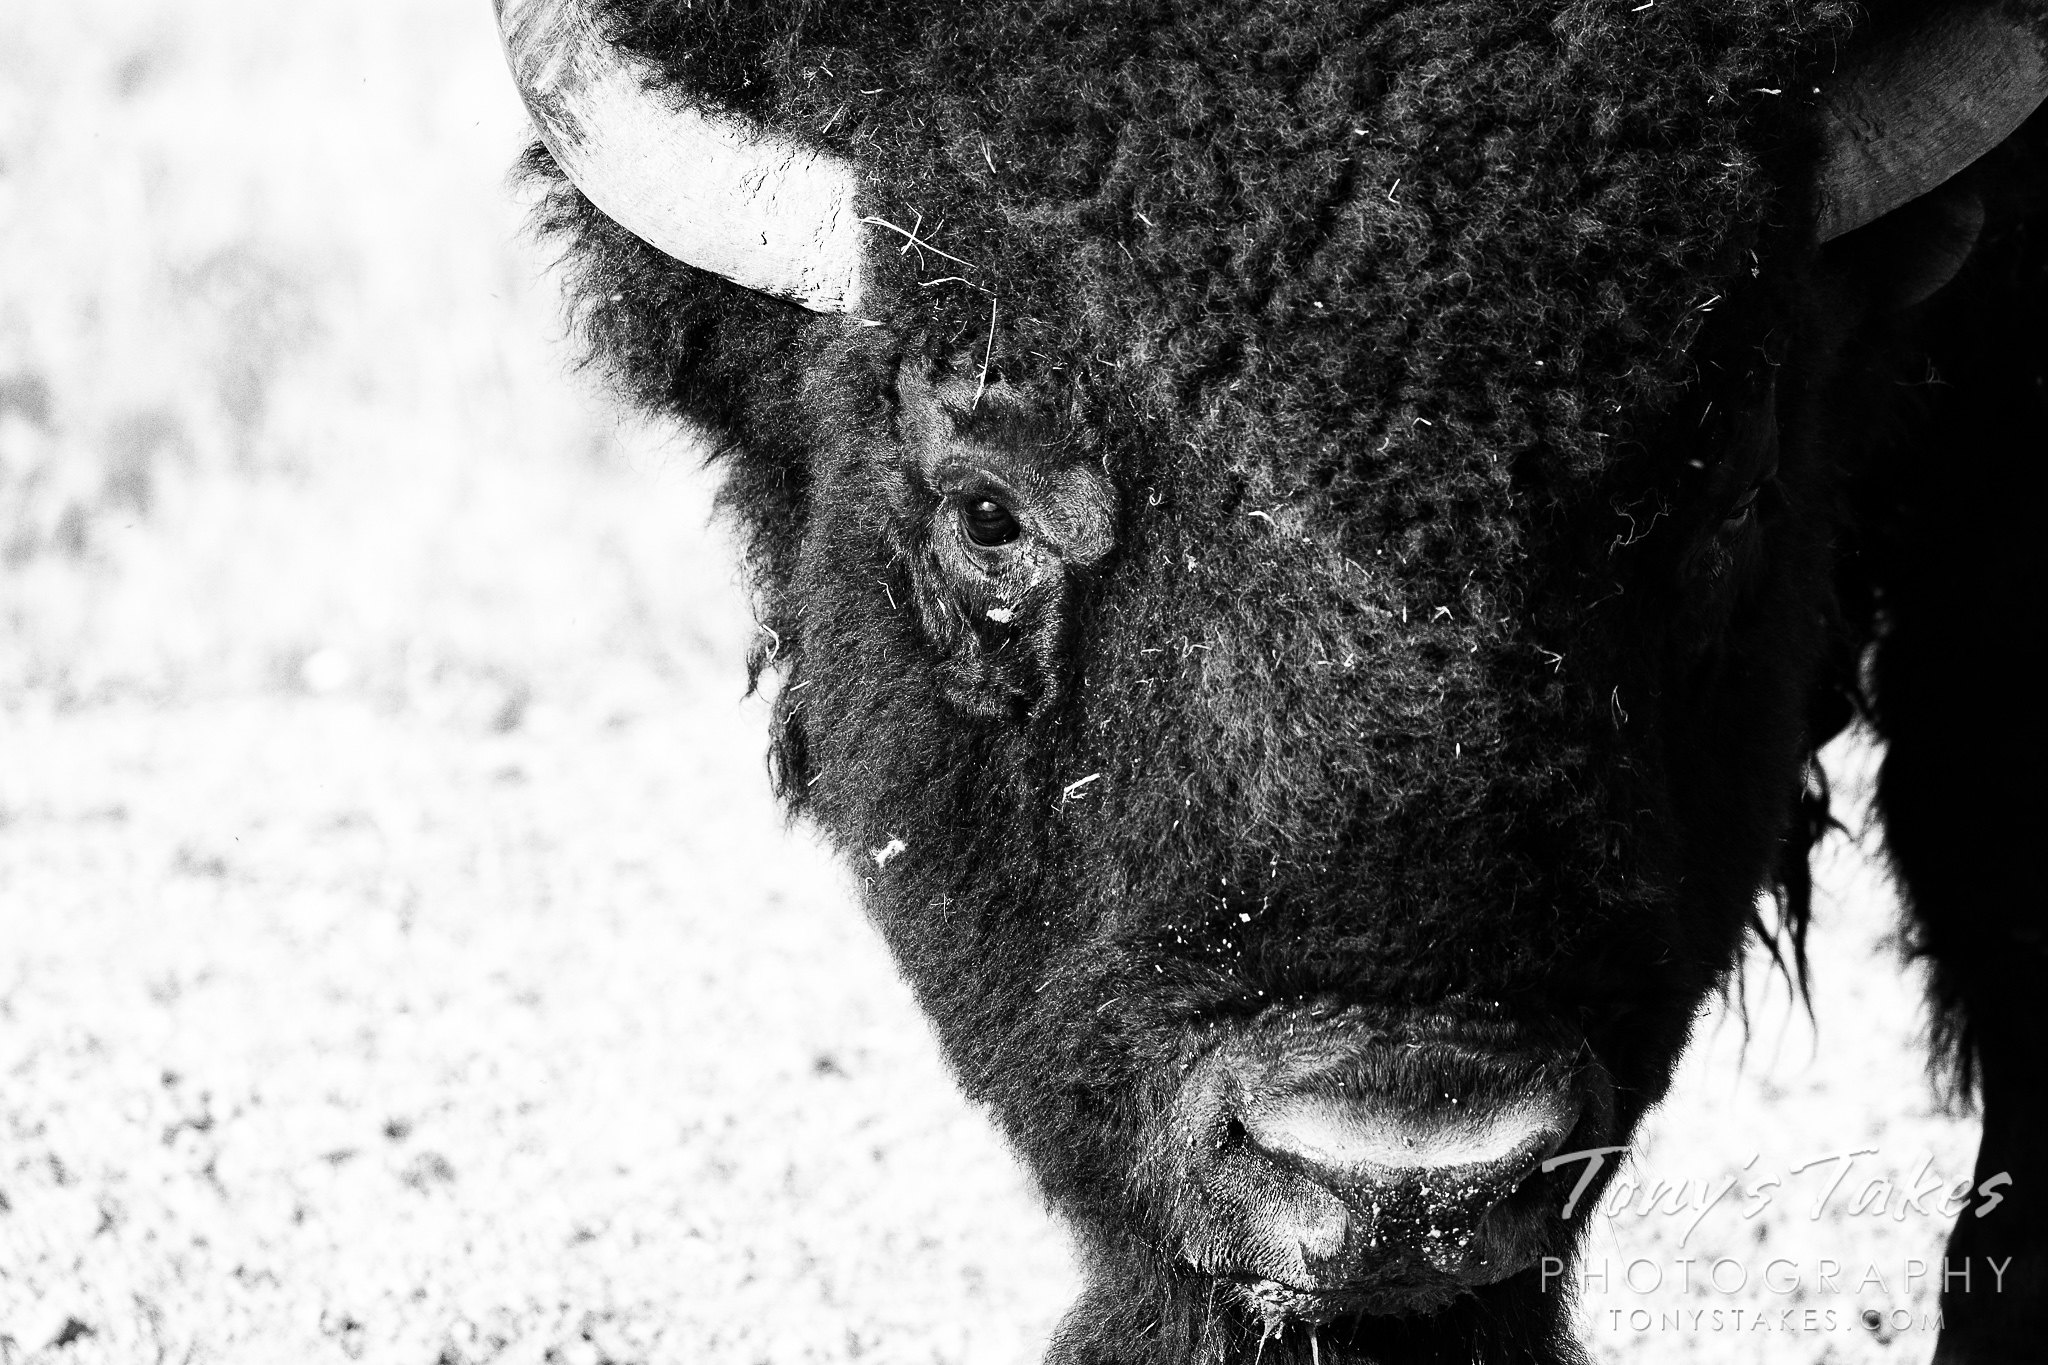 Bison bull in black and white and up close and personal